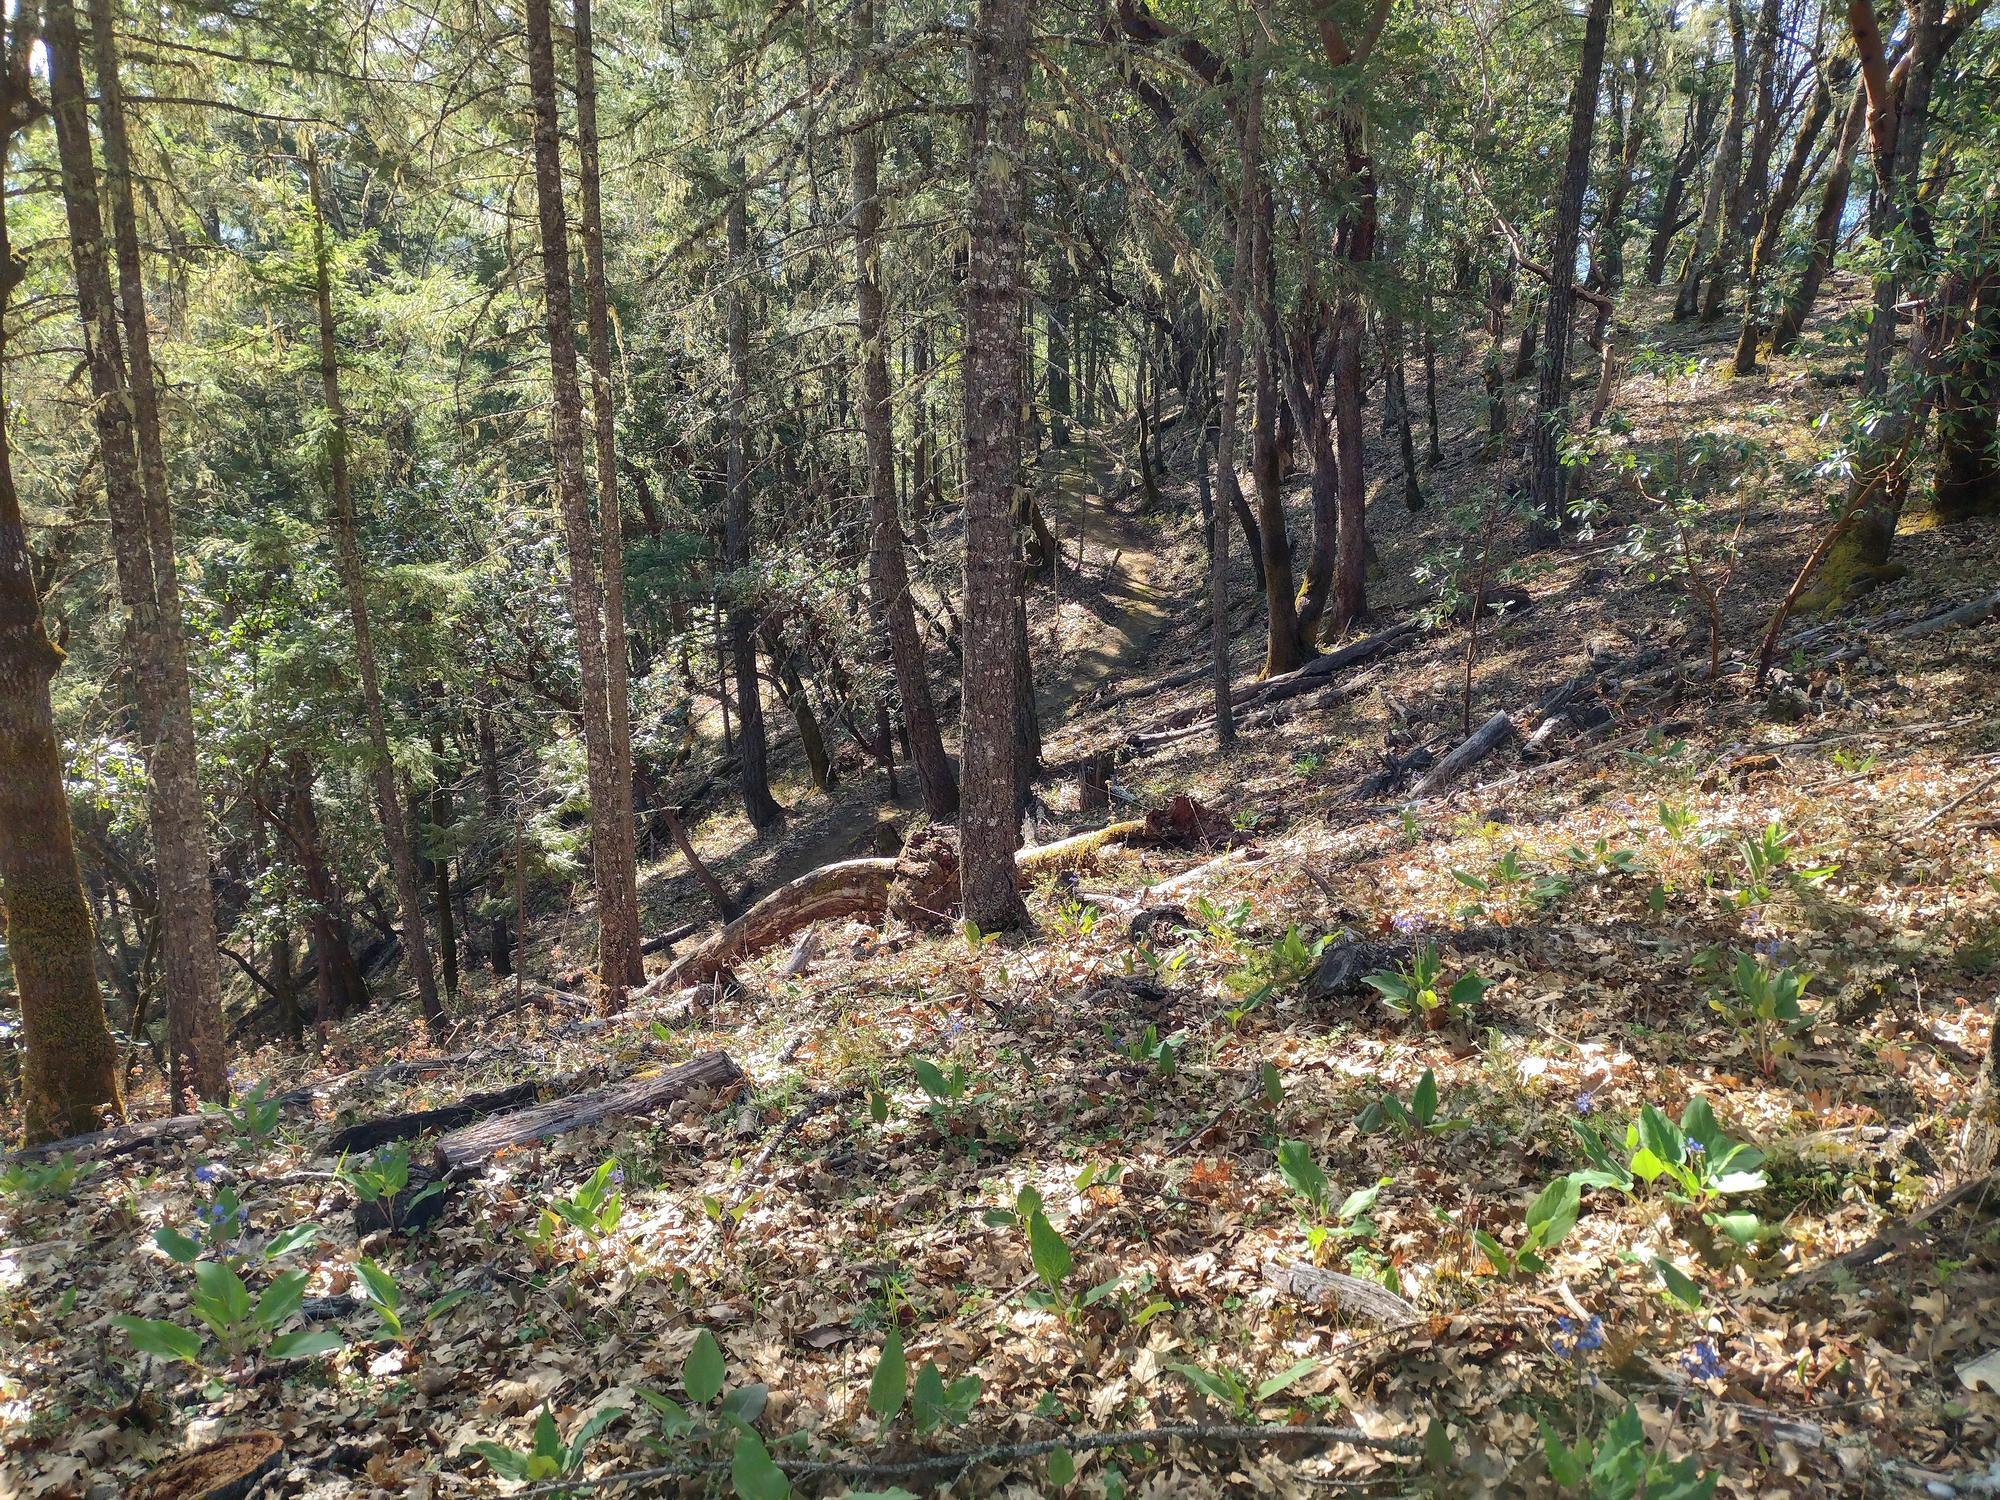 A burn unit in the Rogue Valley: The main fuels are timber litter and oak and madrone leaves.